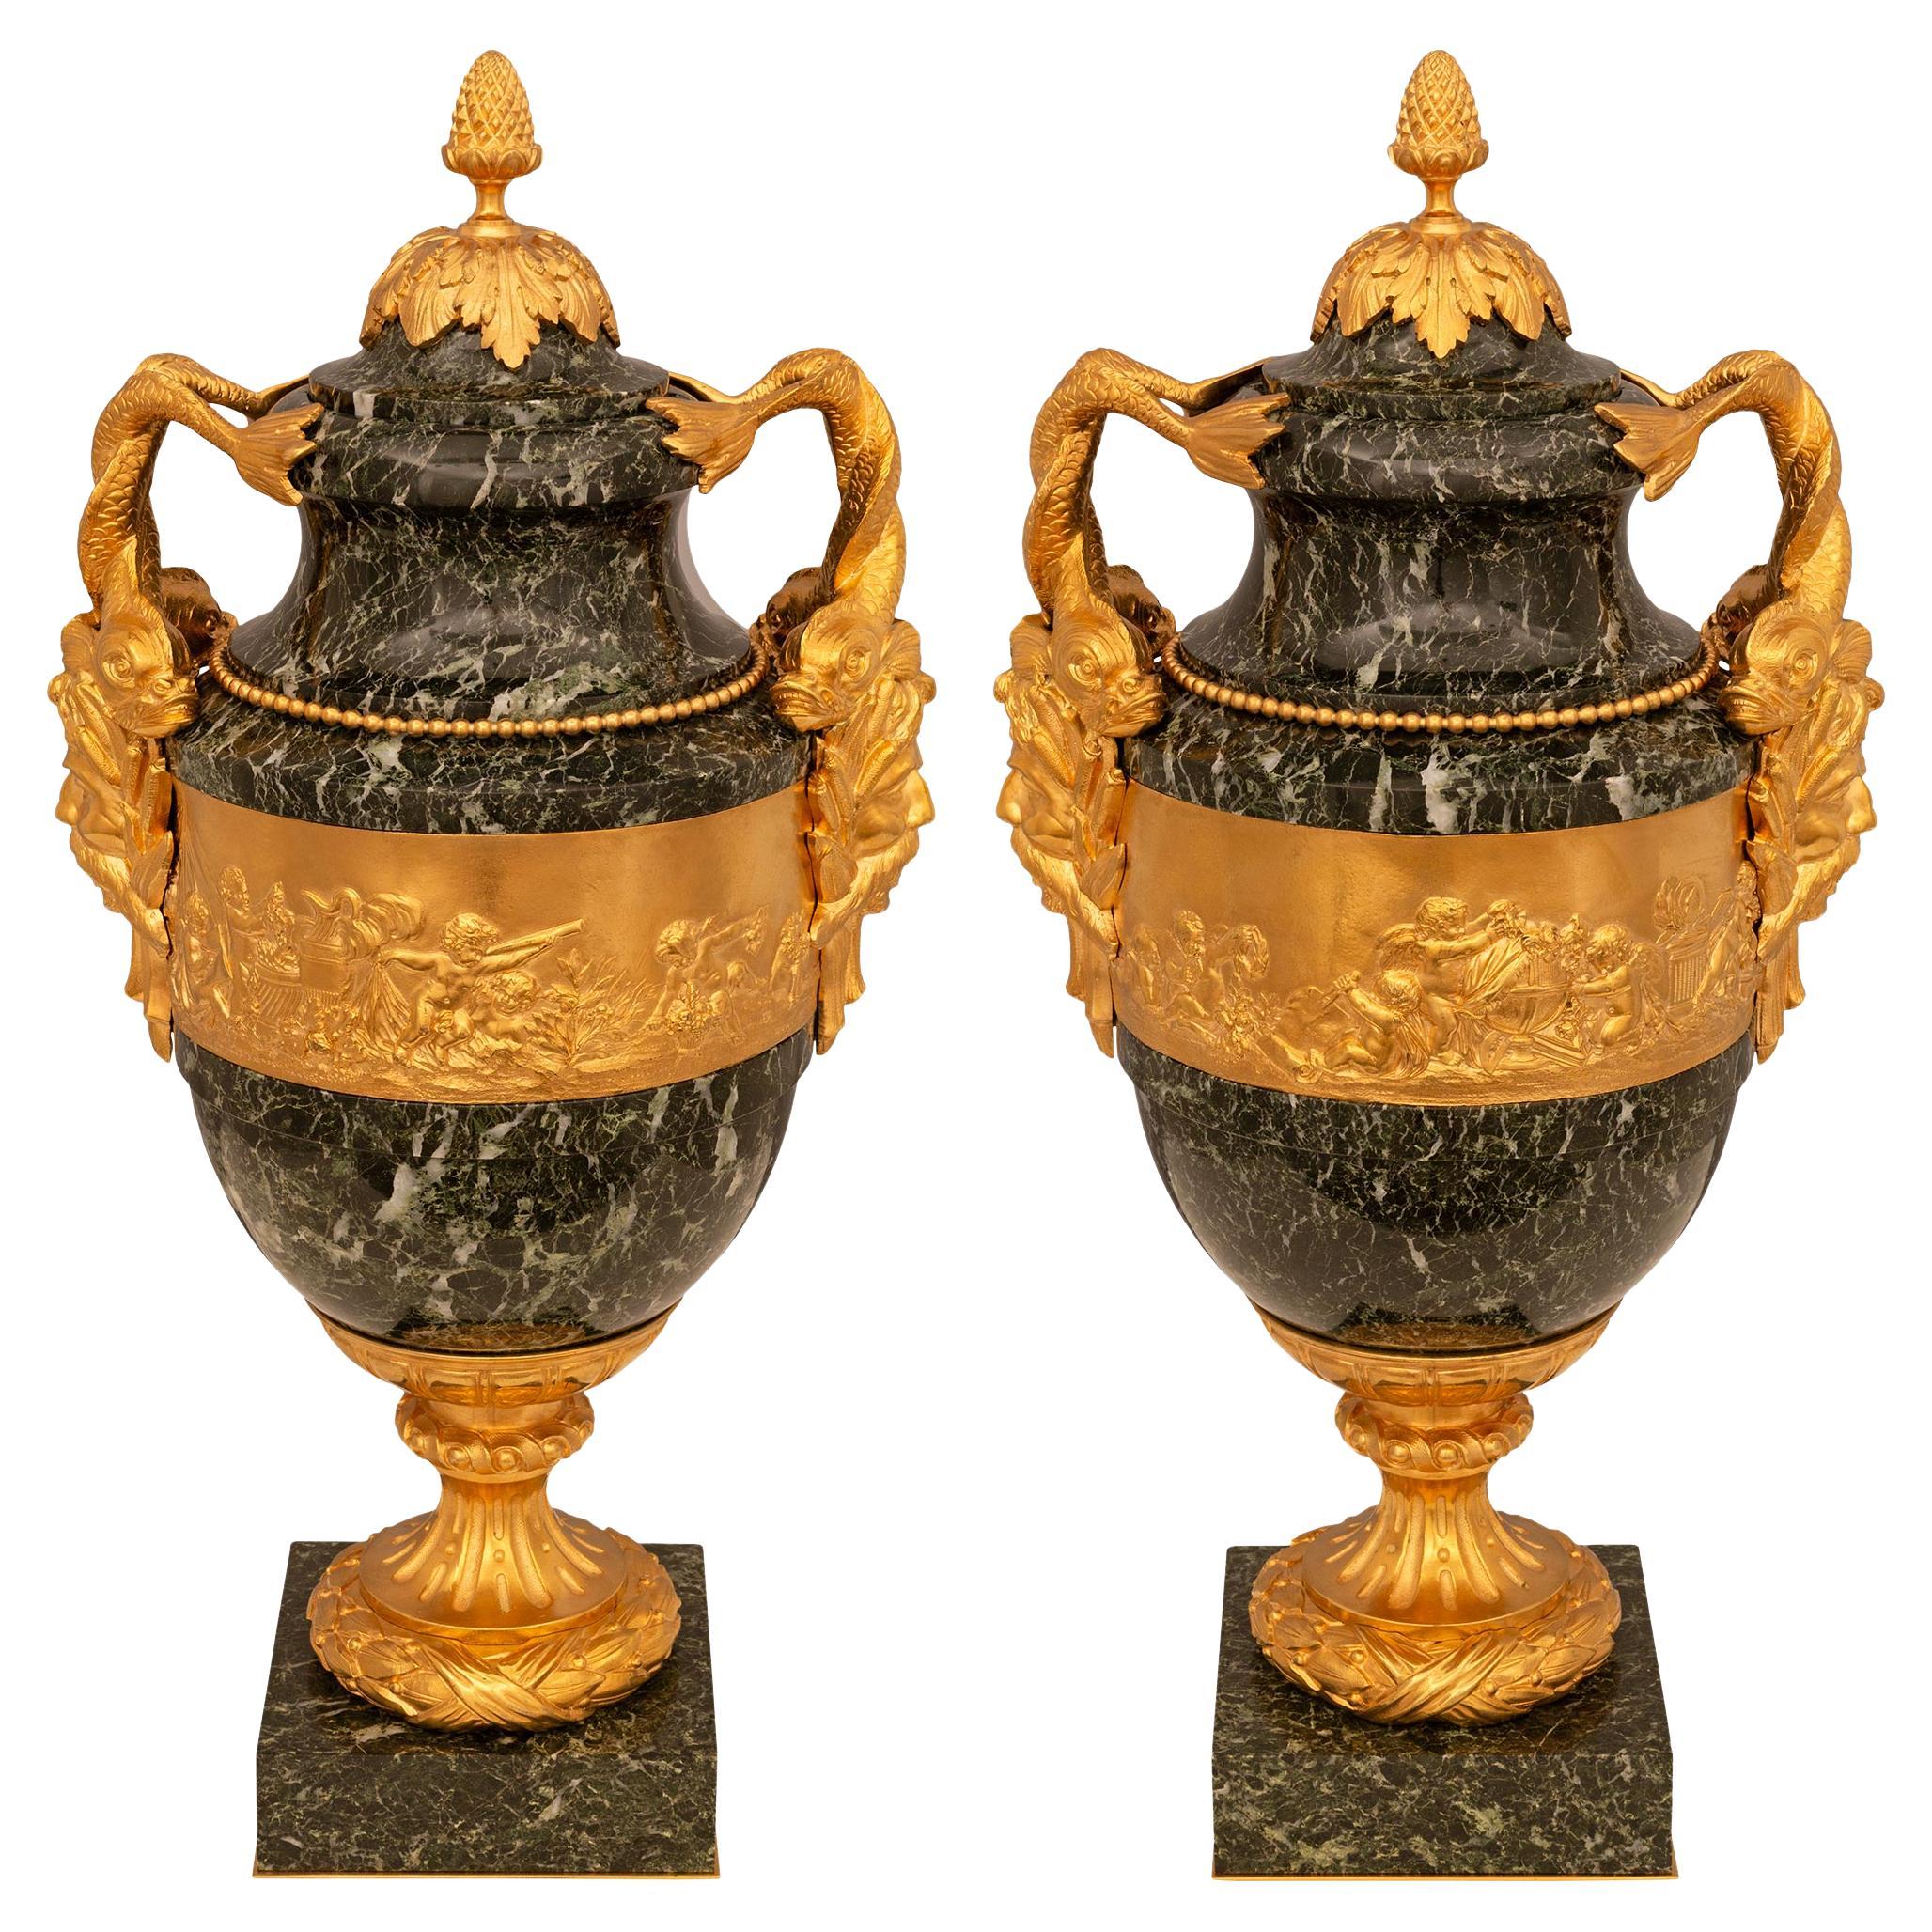 Pair of Stunning French 19th Century Vert Patricia Marble and Ormolu Lidded Urns For Sale